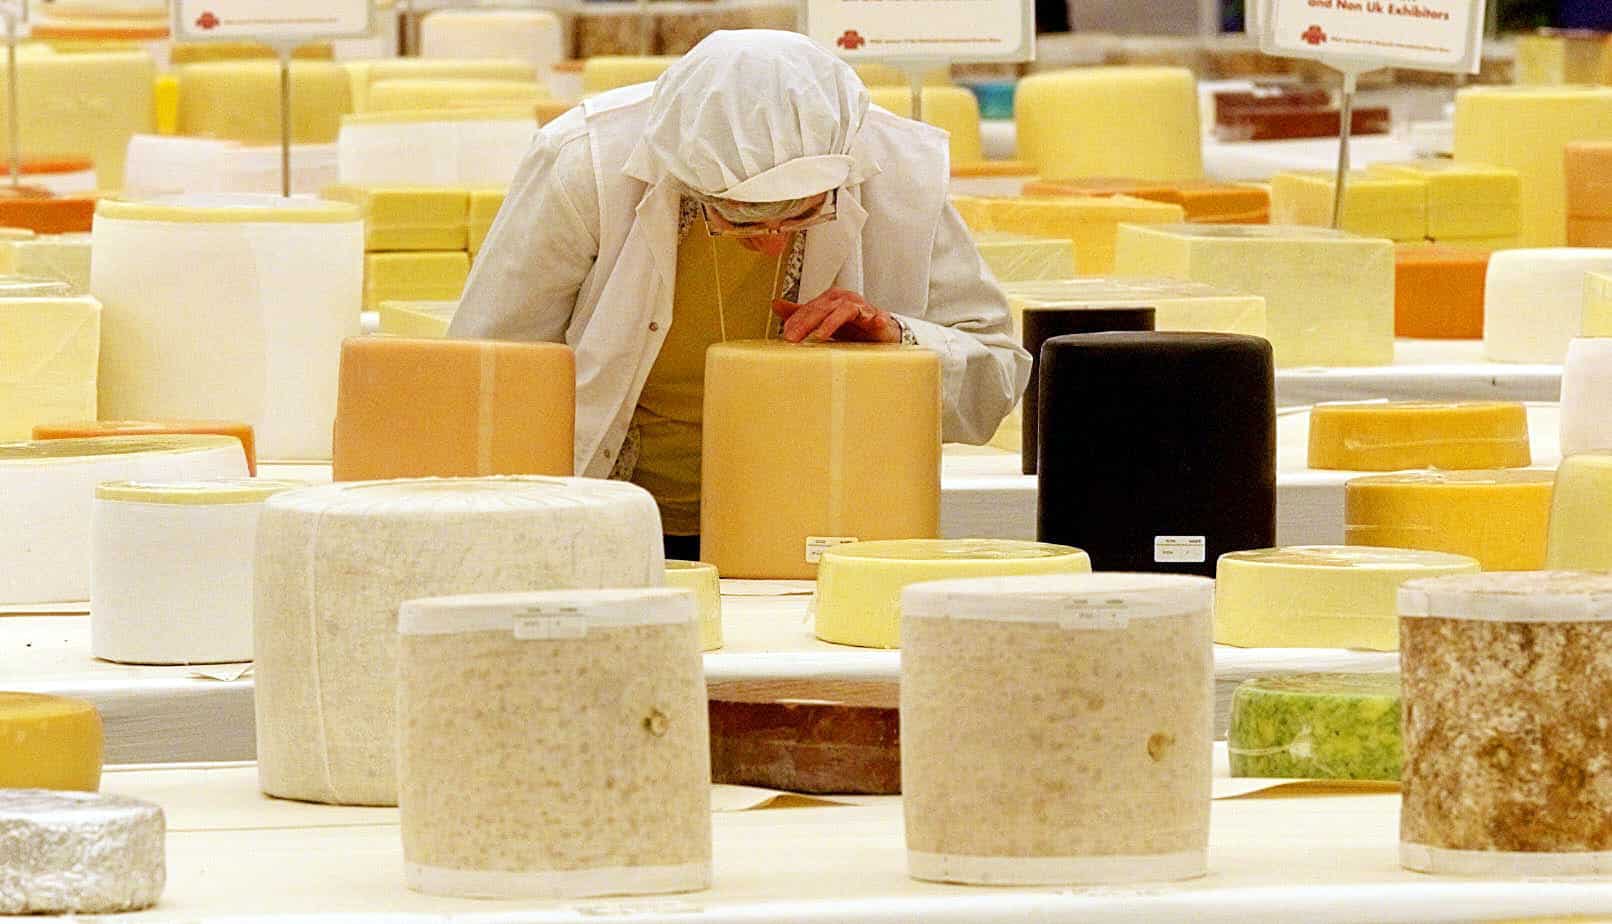 British cheesemaker sells up after Brexit puts £600k hole in his business